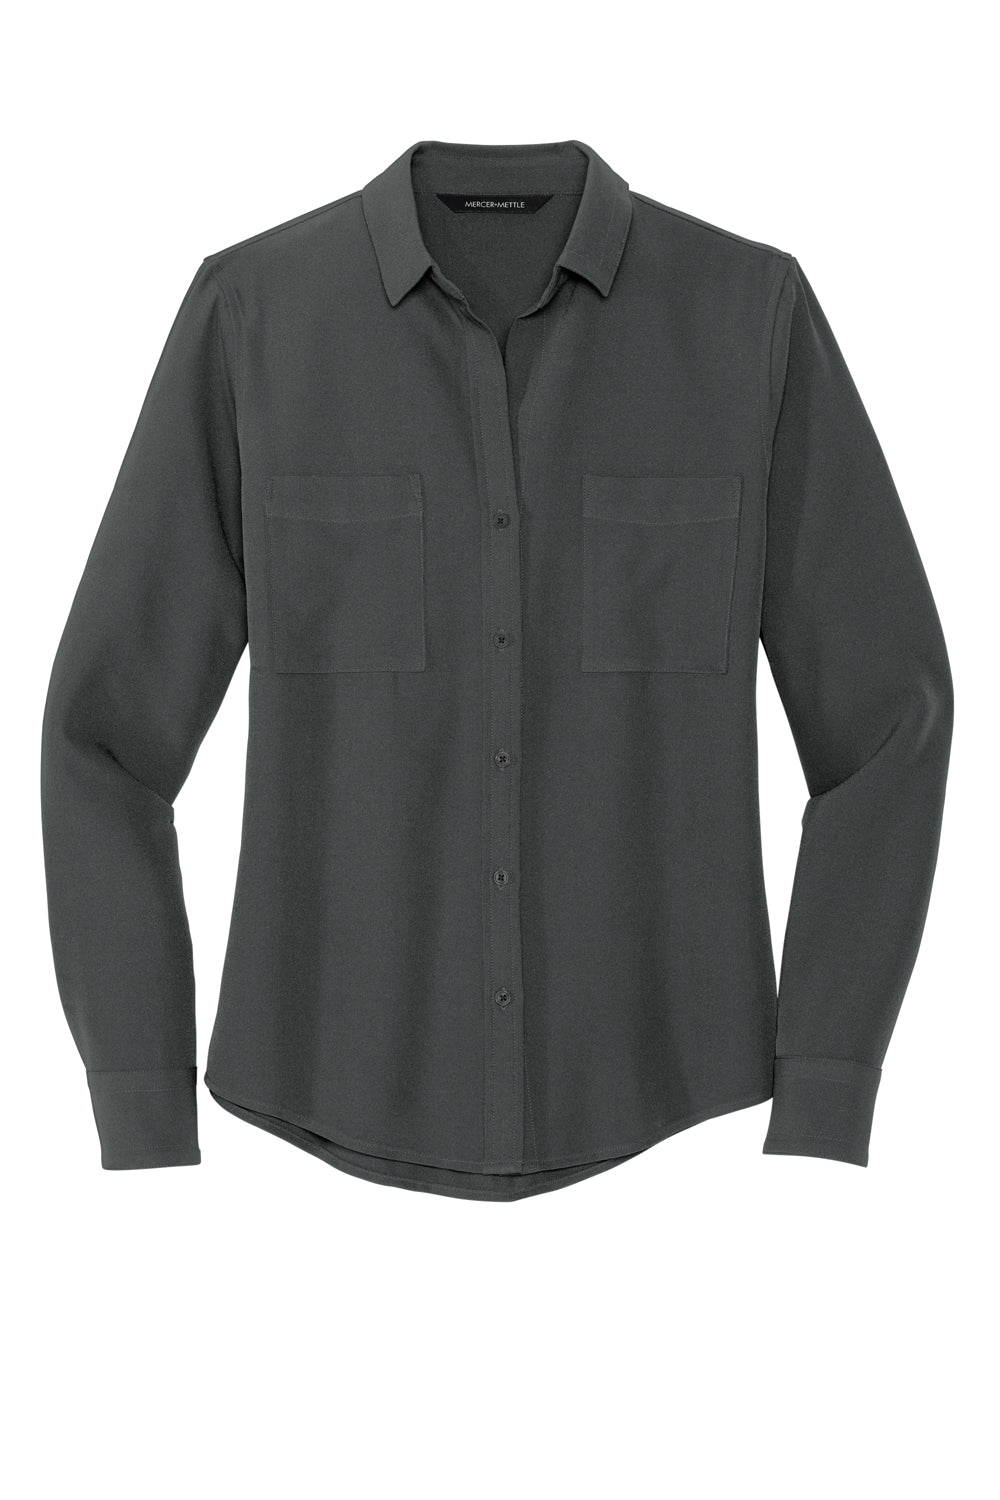 Mercer+Mettle MM2013 Stretch Crepe Long Sleeve Button Down Shirt Anchor Grey Flat Front